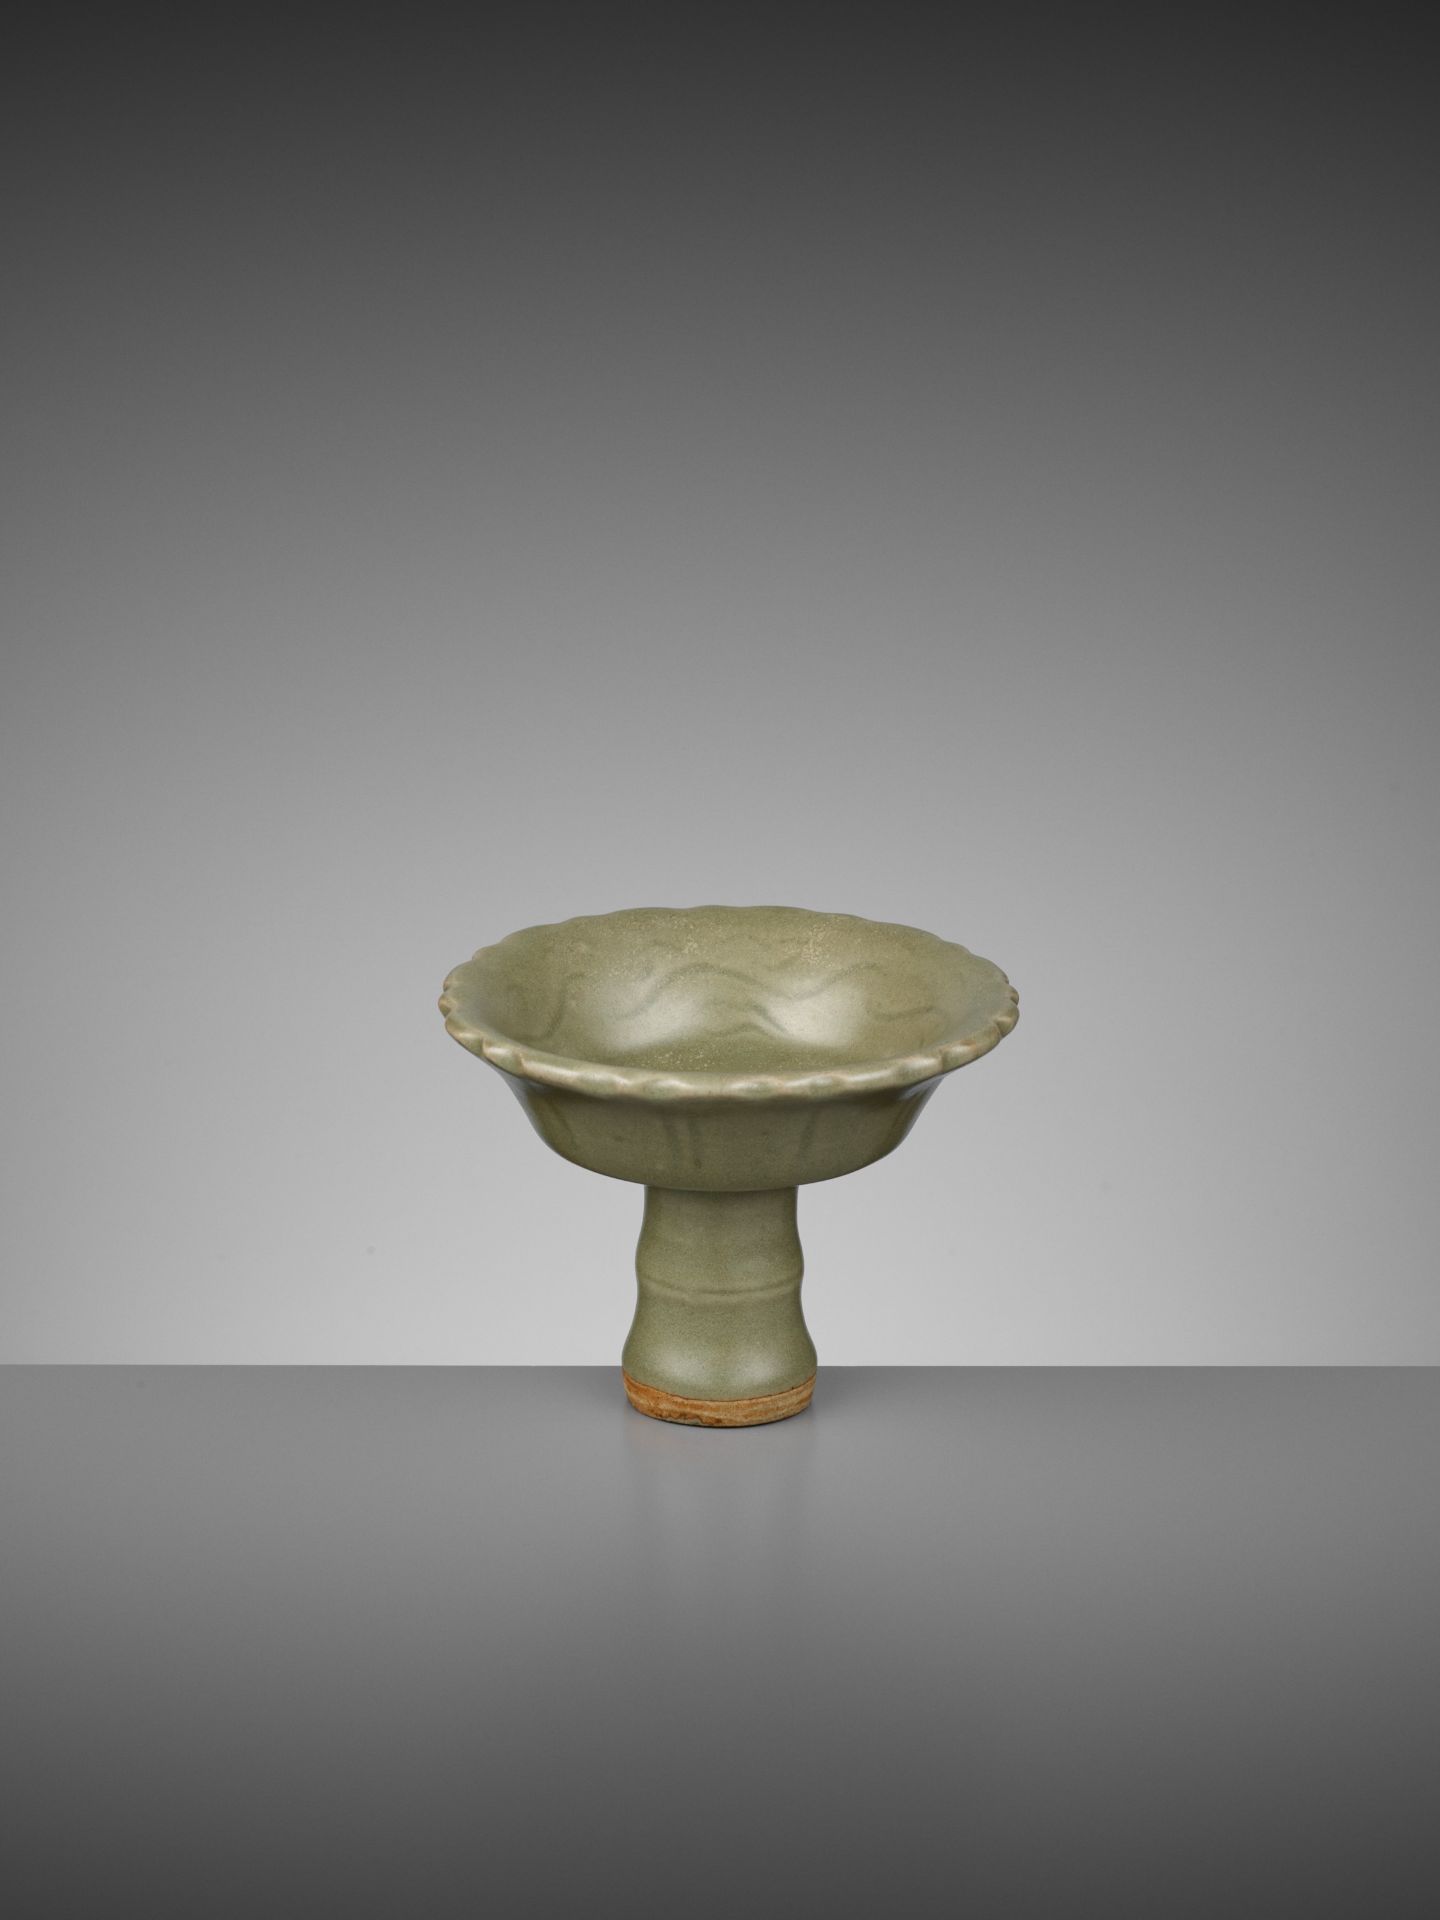 A LONGQUAN CELADON 'BAMBOO' BARBED-RIM STEM CUP, YUAN TO EARLY MING